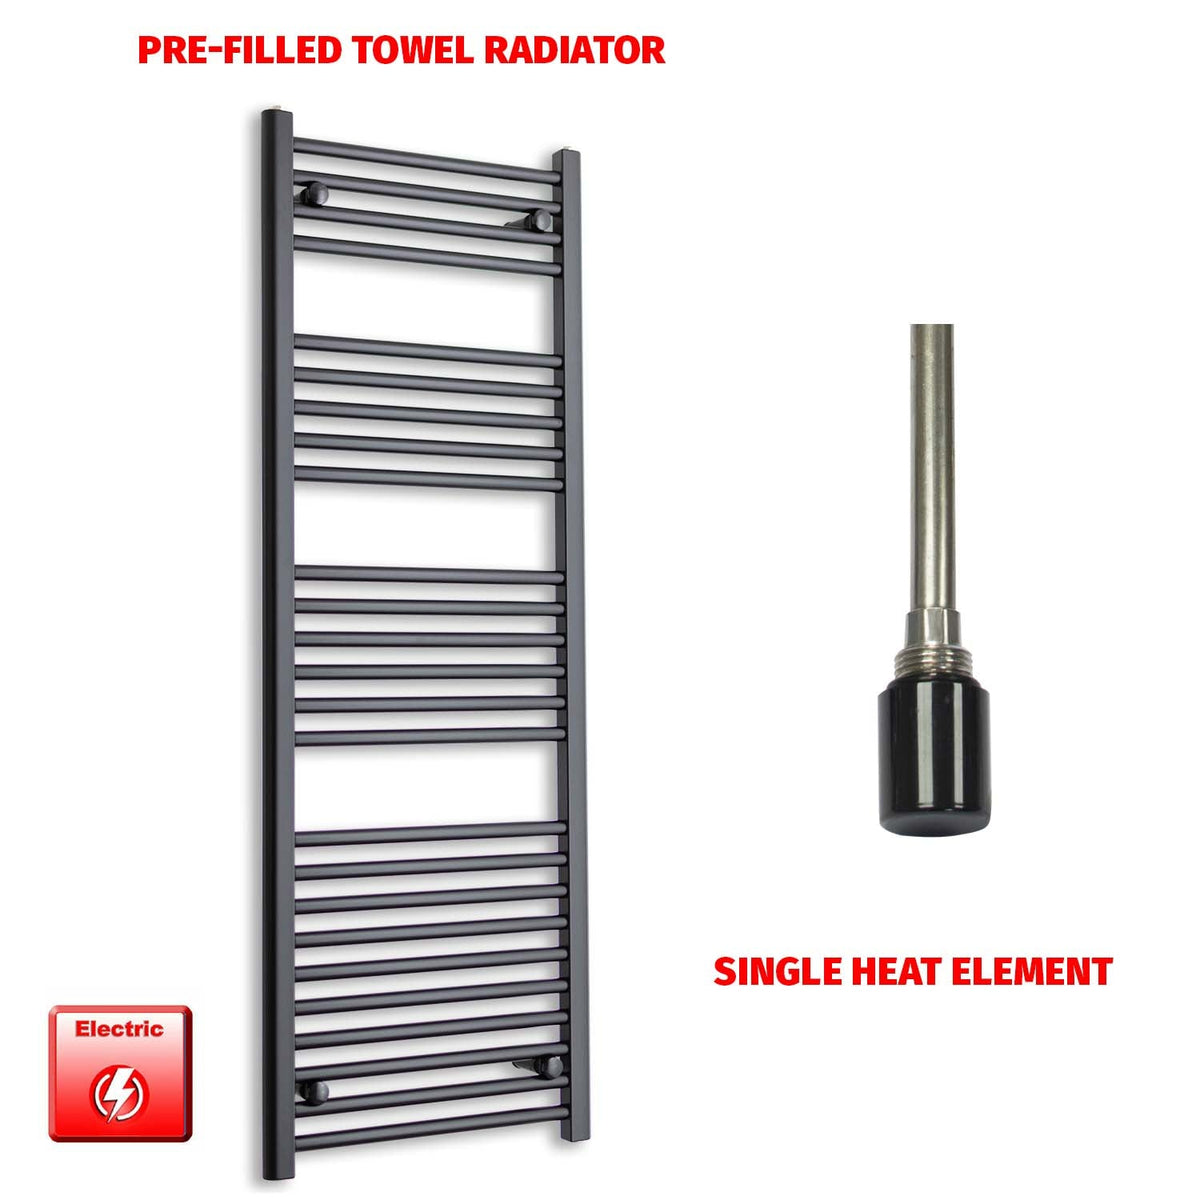 1400 x 550mm Wide Flat Black Pre-Filled Electric Heated Towel Radiator HTR Single No Timer